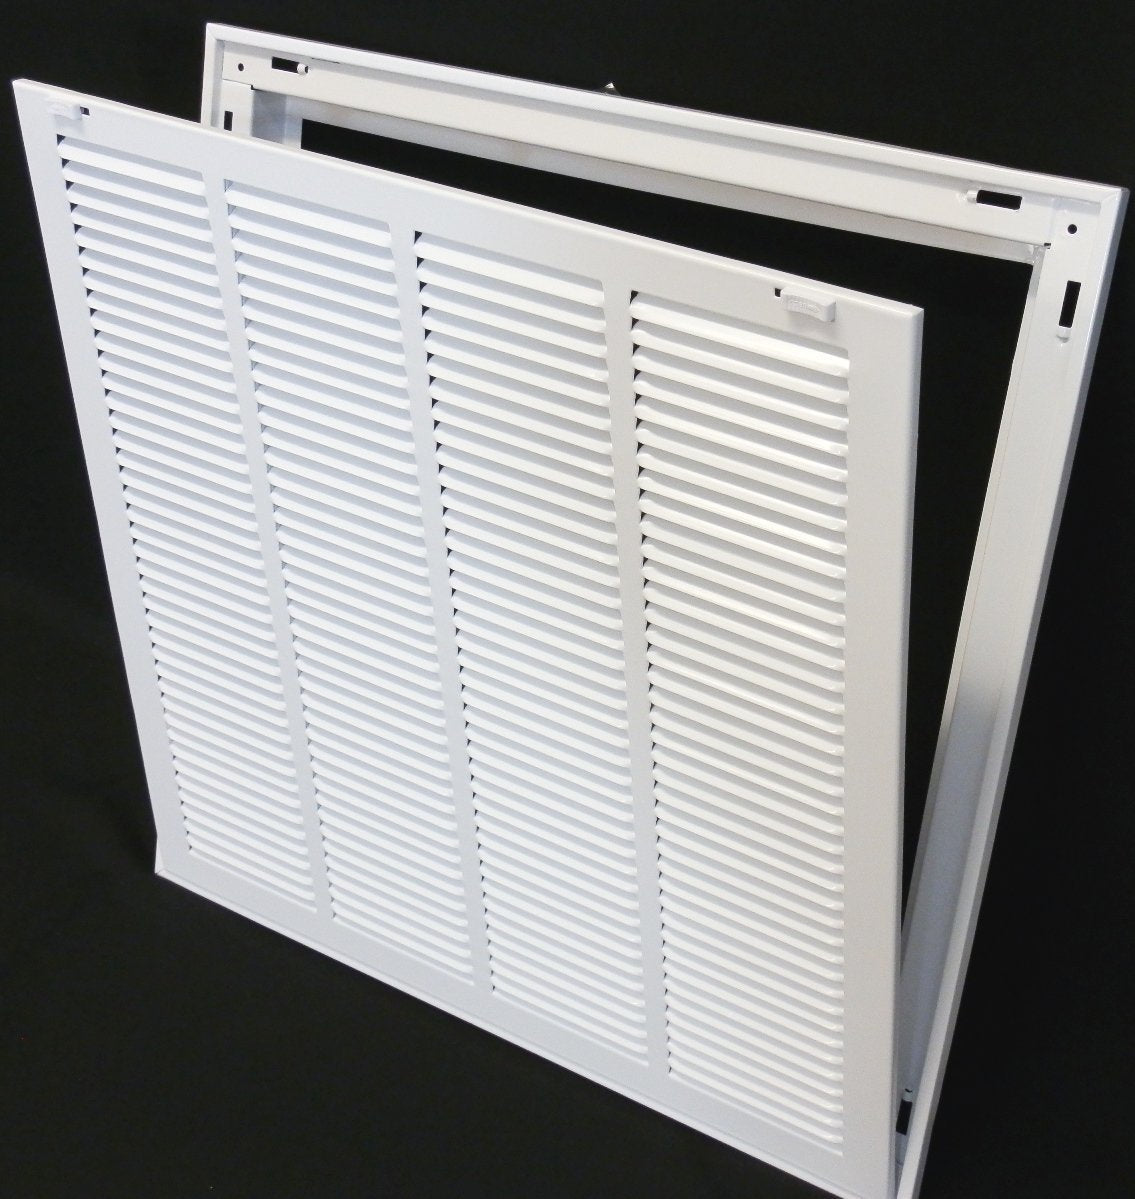 18&quot; X 8&quot; Steel Return Air Filter Grille for 1&quot; Filter - Removable Frame - [Outer Dimensions: 20 5/8&quot; X 10 5/8&quot;]